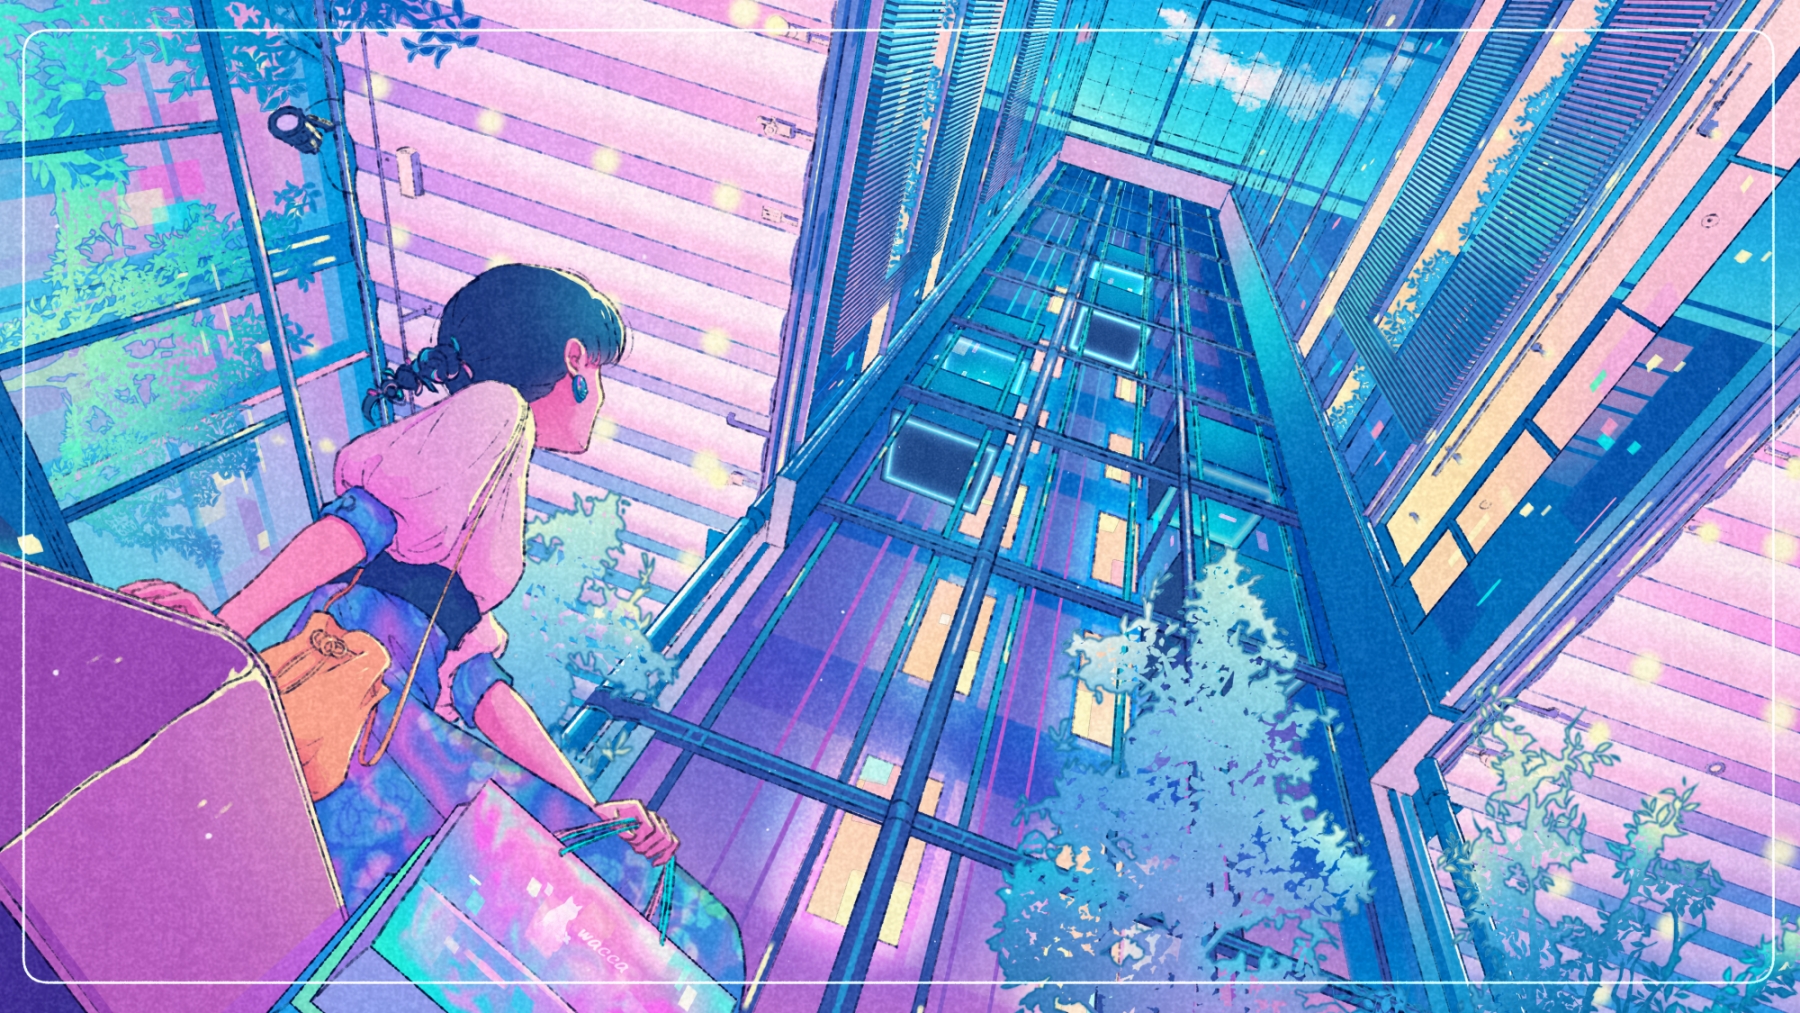 Anime 1800x1013 anime anime girls looking up building earring sitting purse dress lights clouds sky Wacca interior short hair